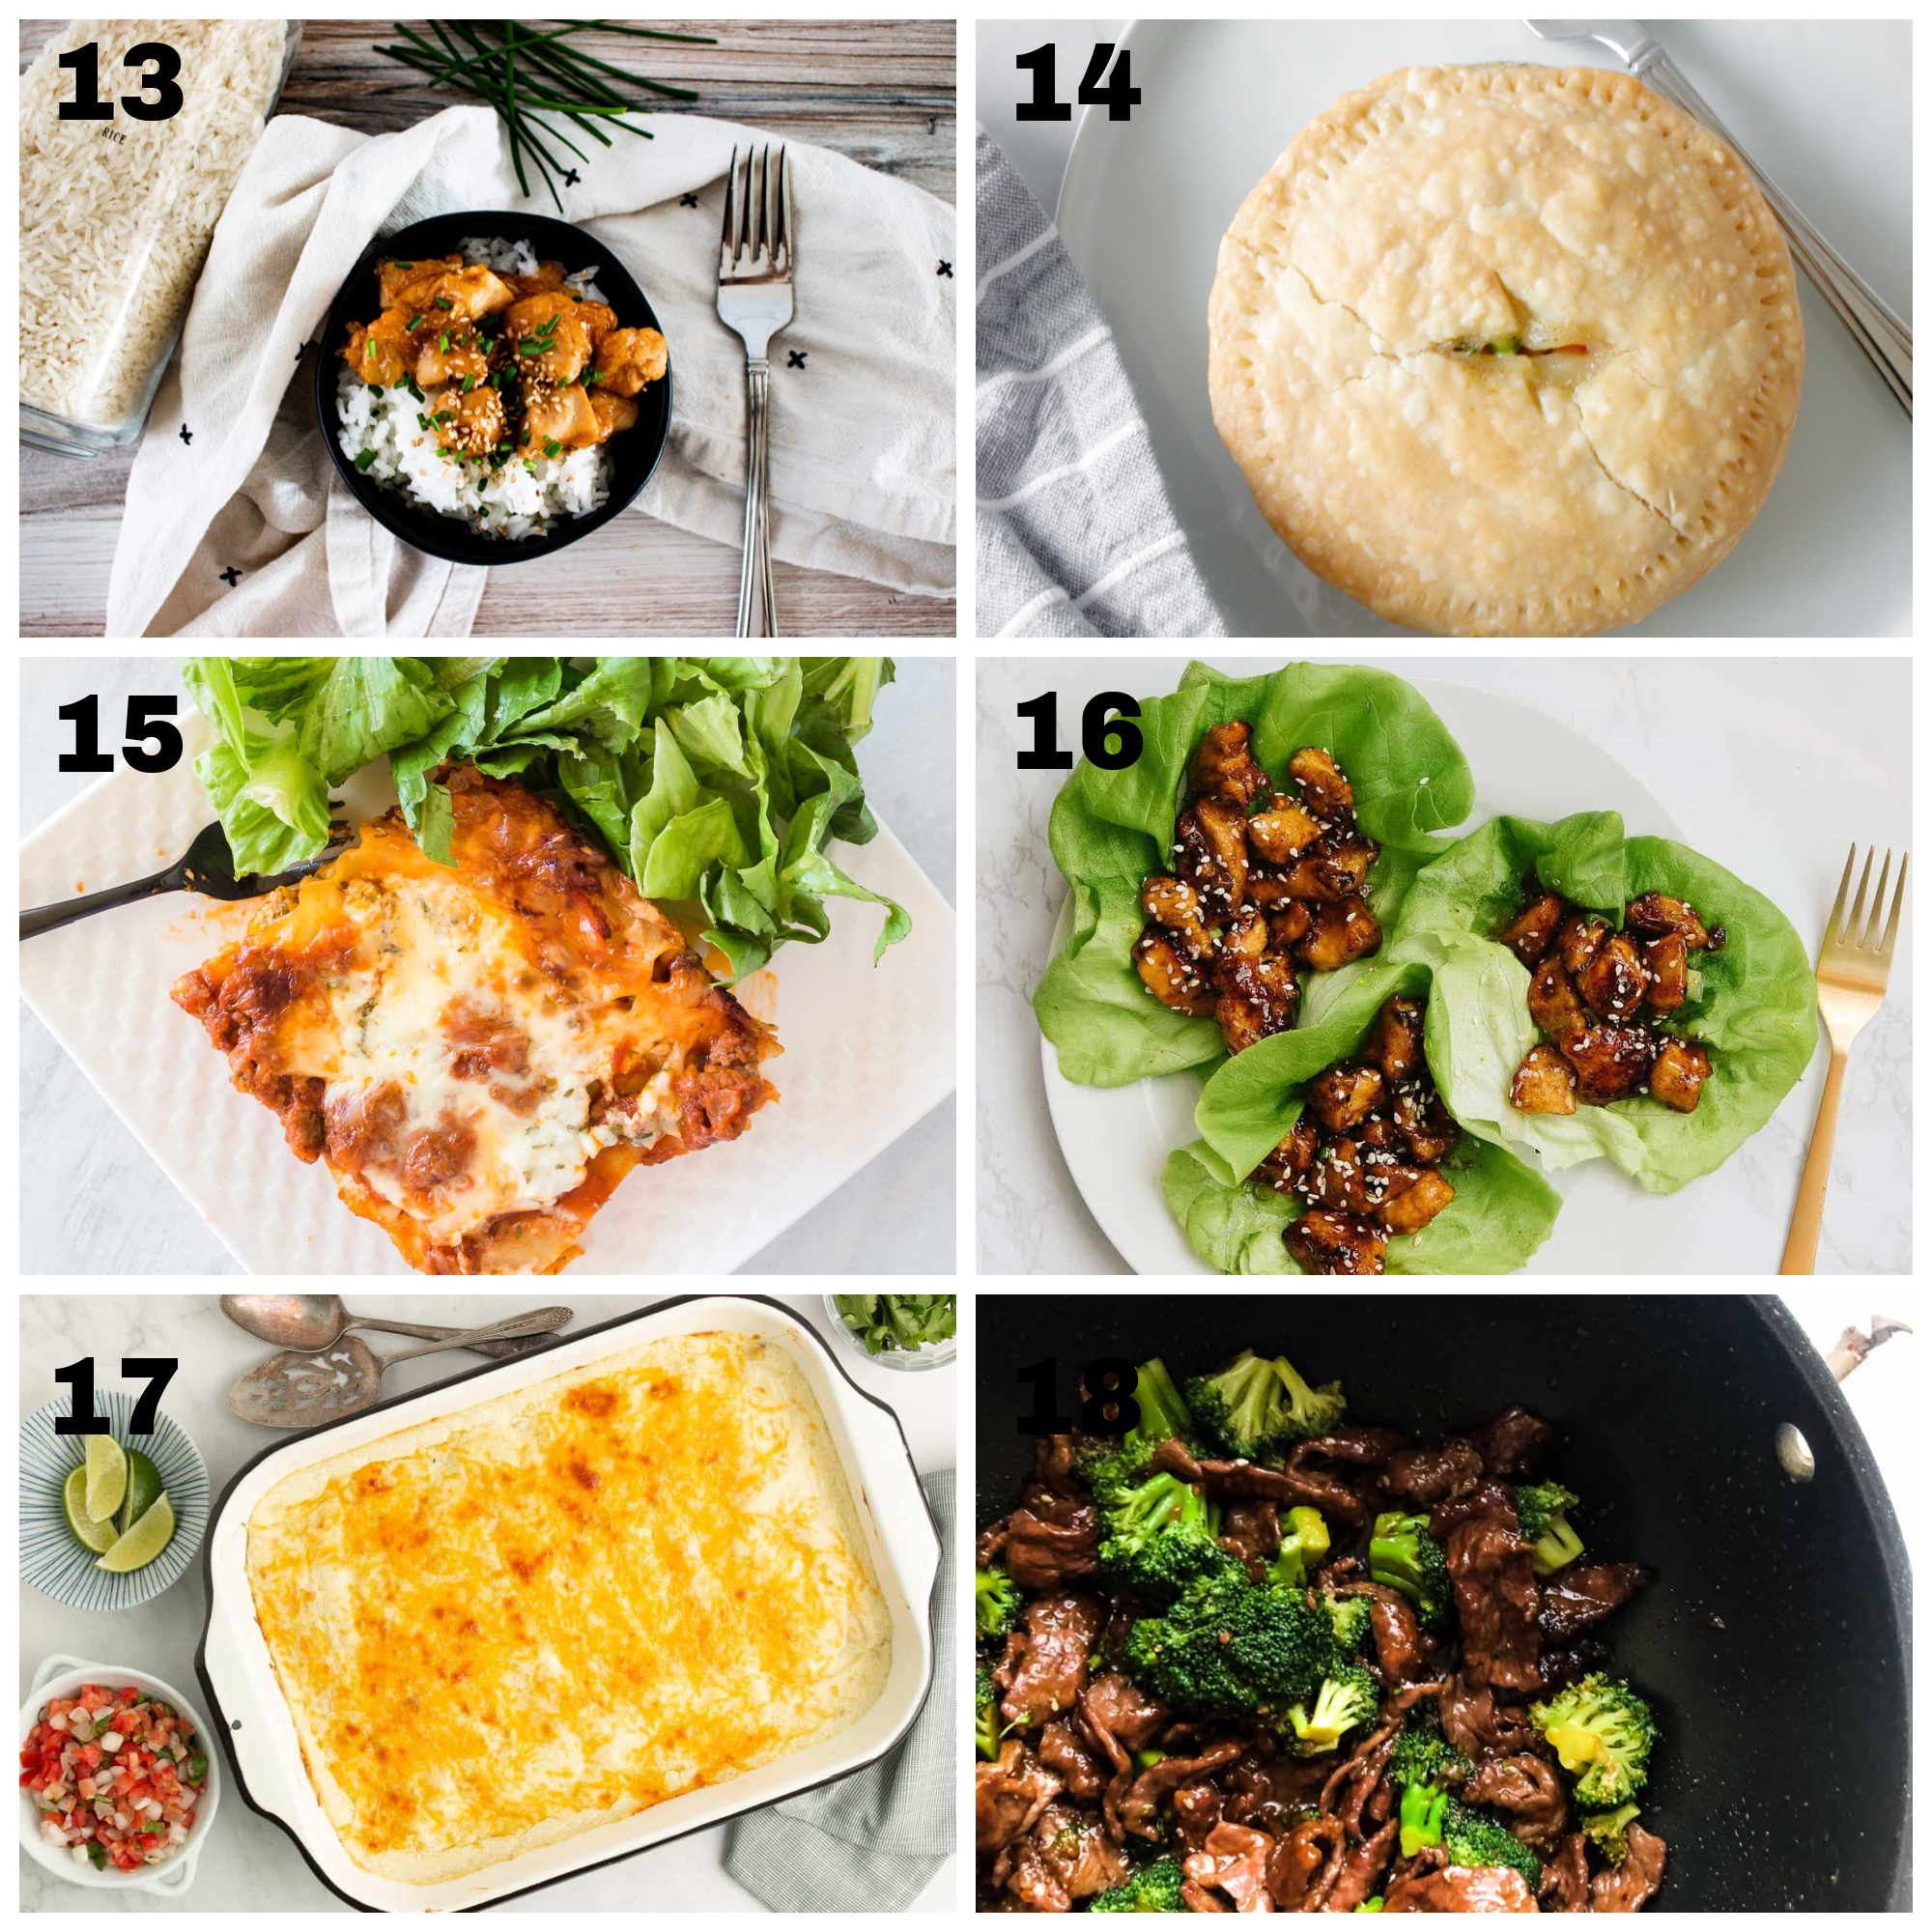 6 dinner ideas for meals for two that are make ahead and freezer-friendly labeled 13-18